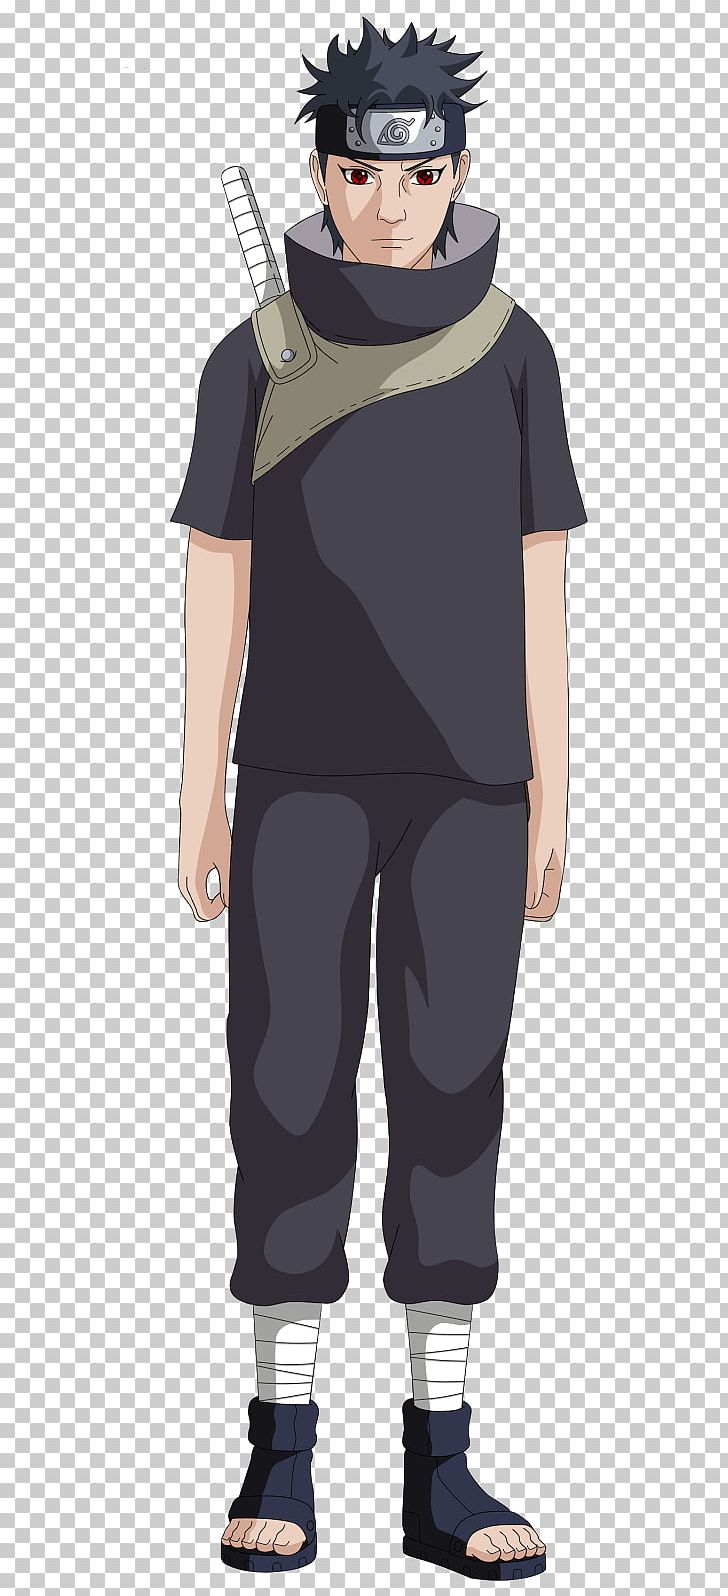 Shisui Uchiha transparent background PNG cliparts free download